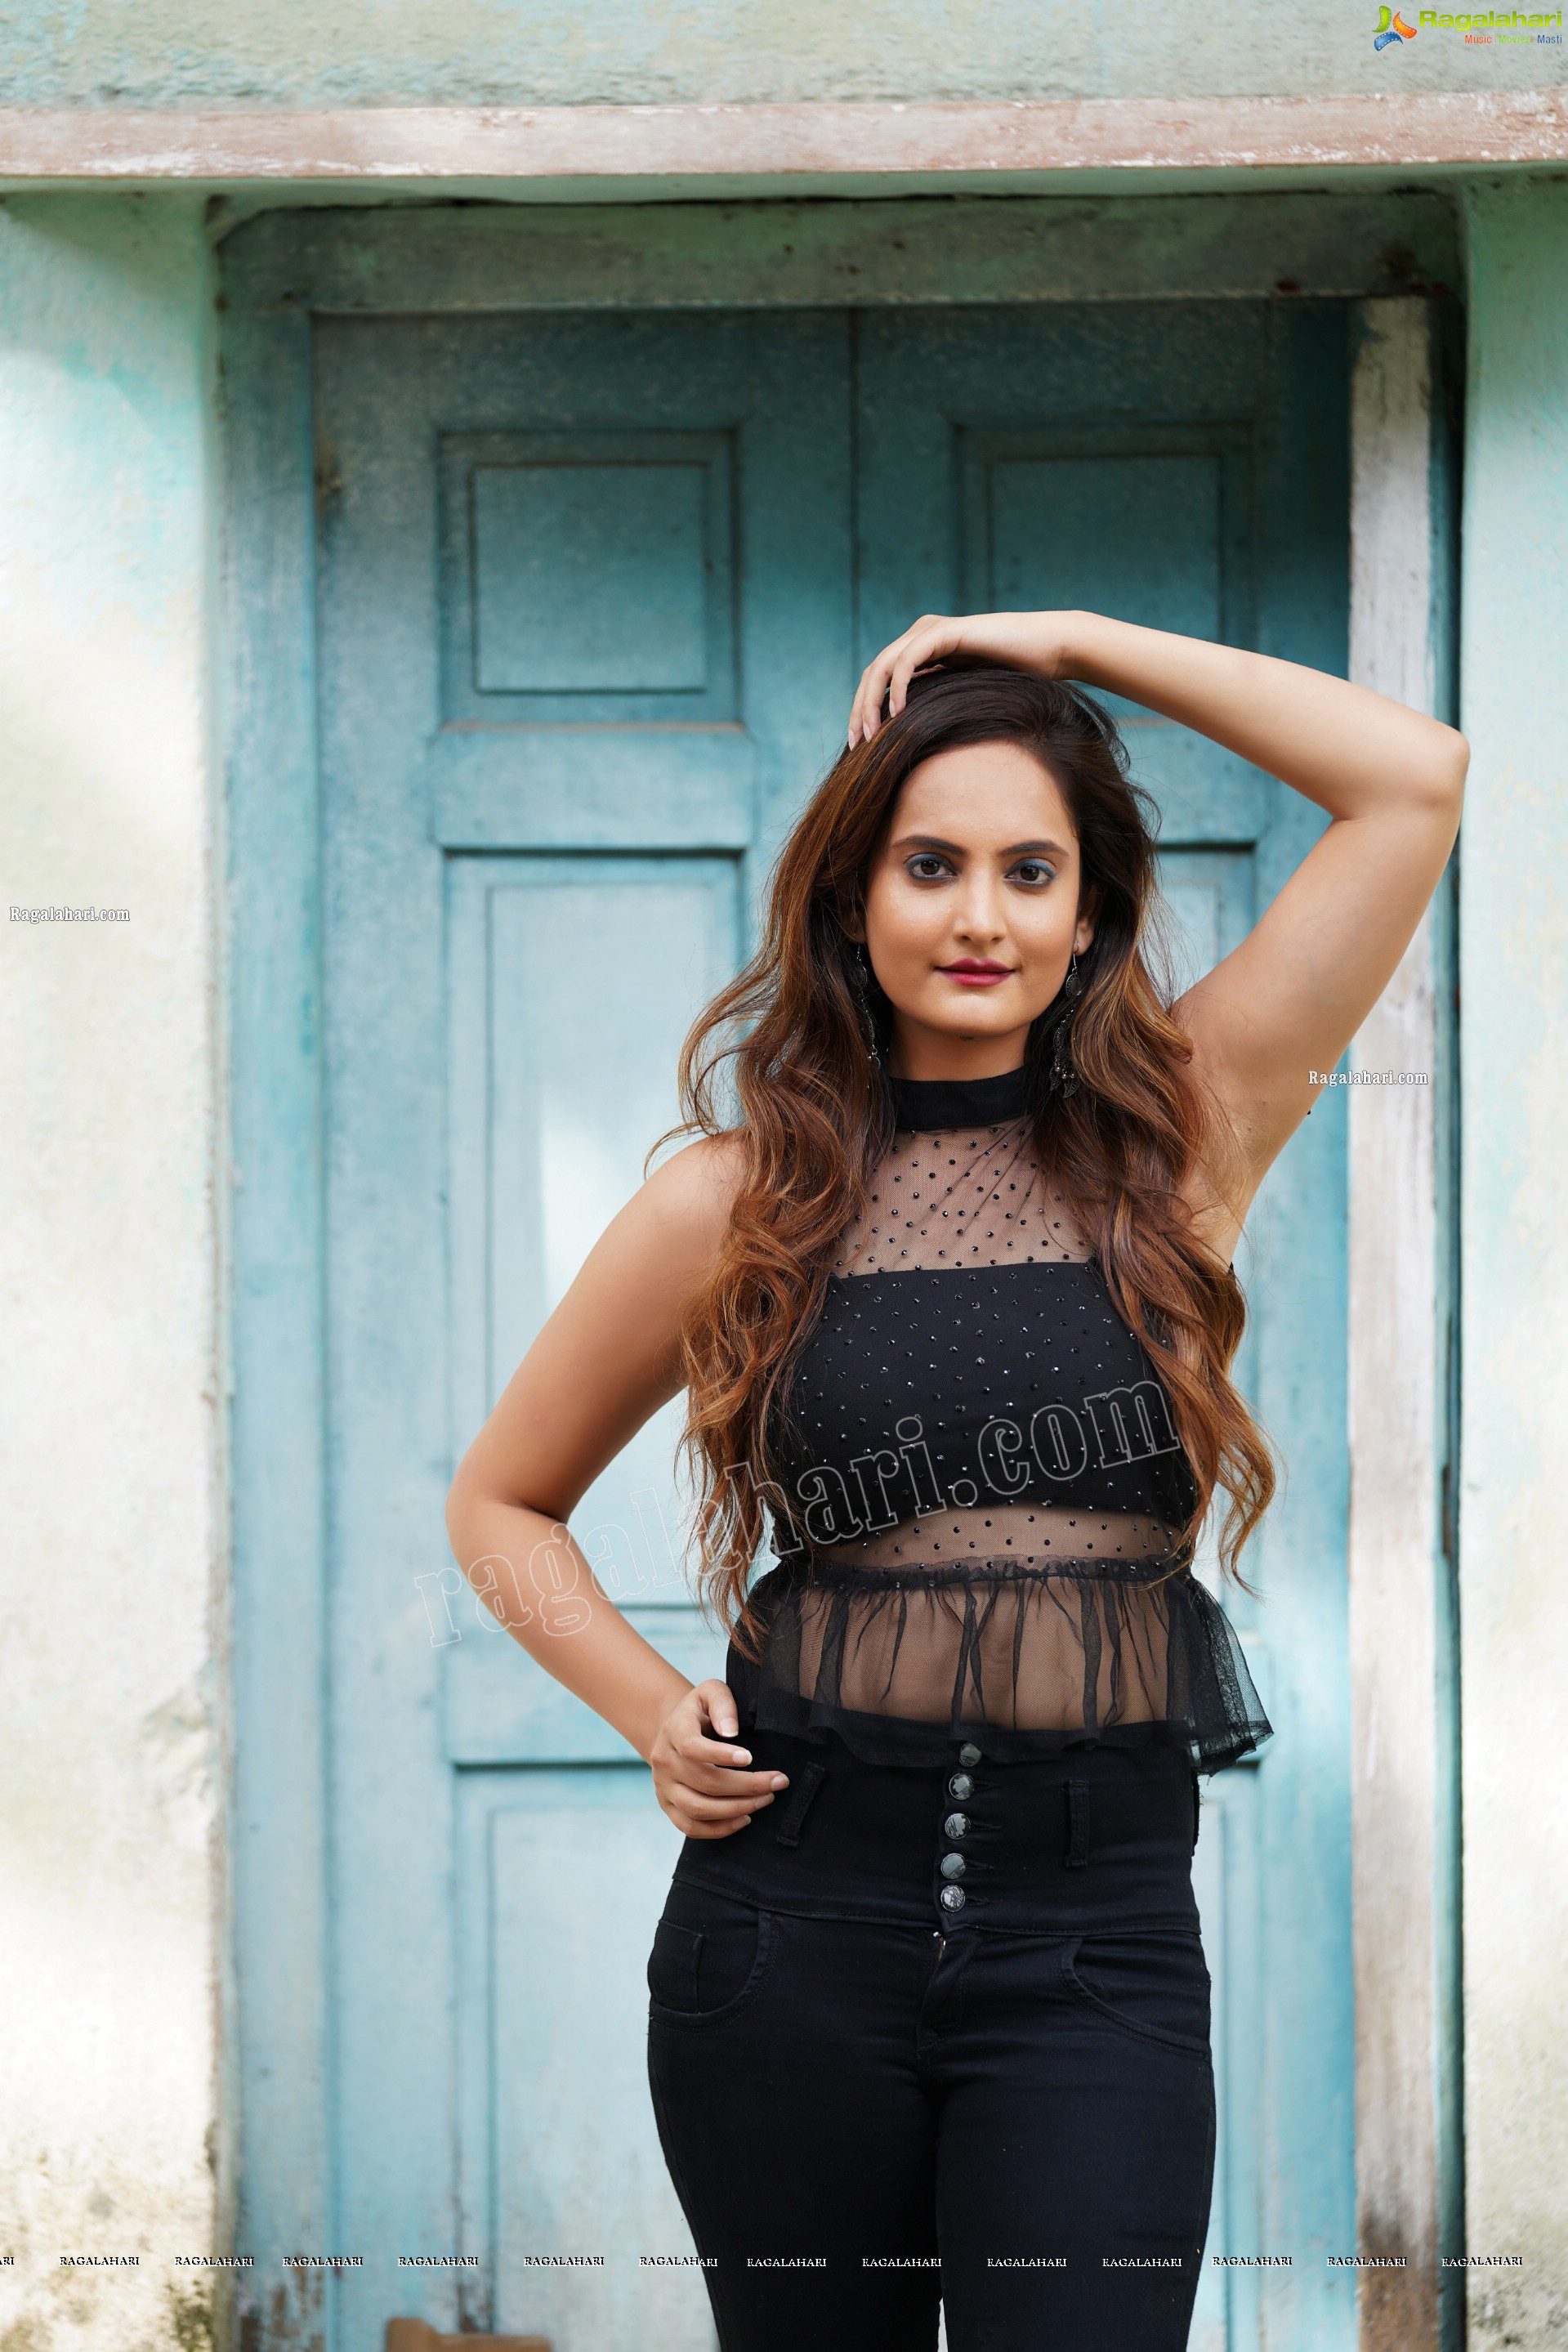 Dhriti Patel in All Black Outfit, Exclusive Photoshoot